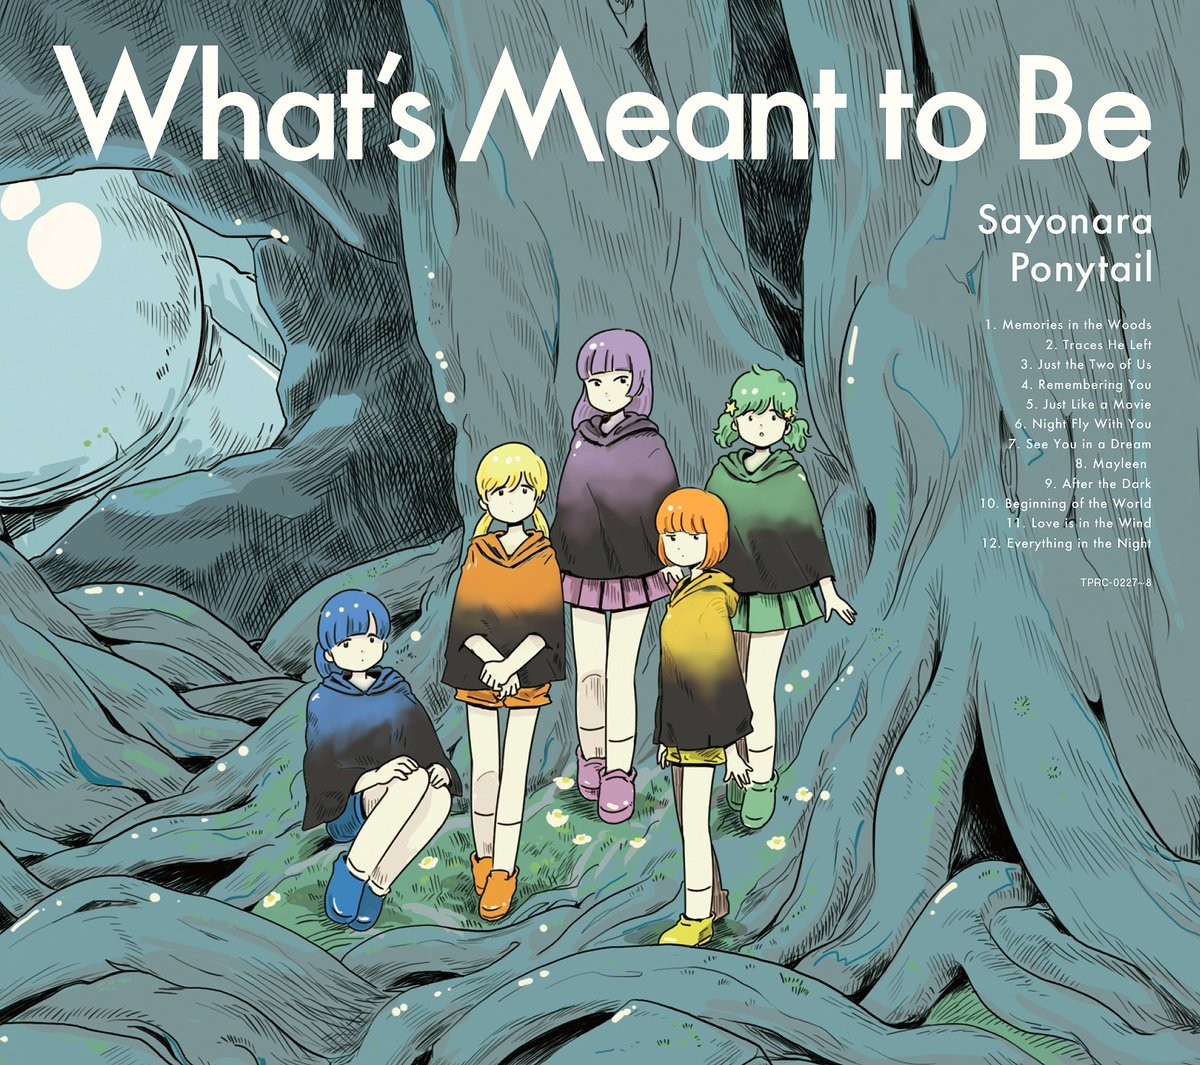 Sayonara Ponytail (さよならポニーテール) – What’s Meant to Be (来るべき世界) [FLAC + MP3 320 / CD] [2019.06.12]